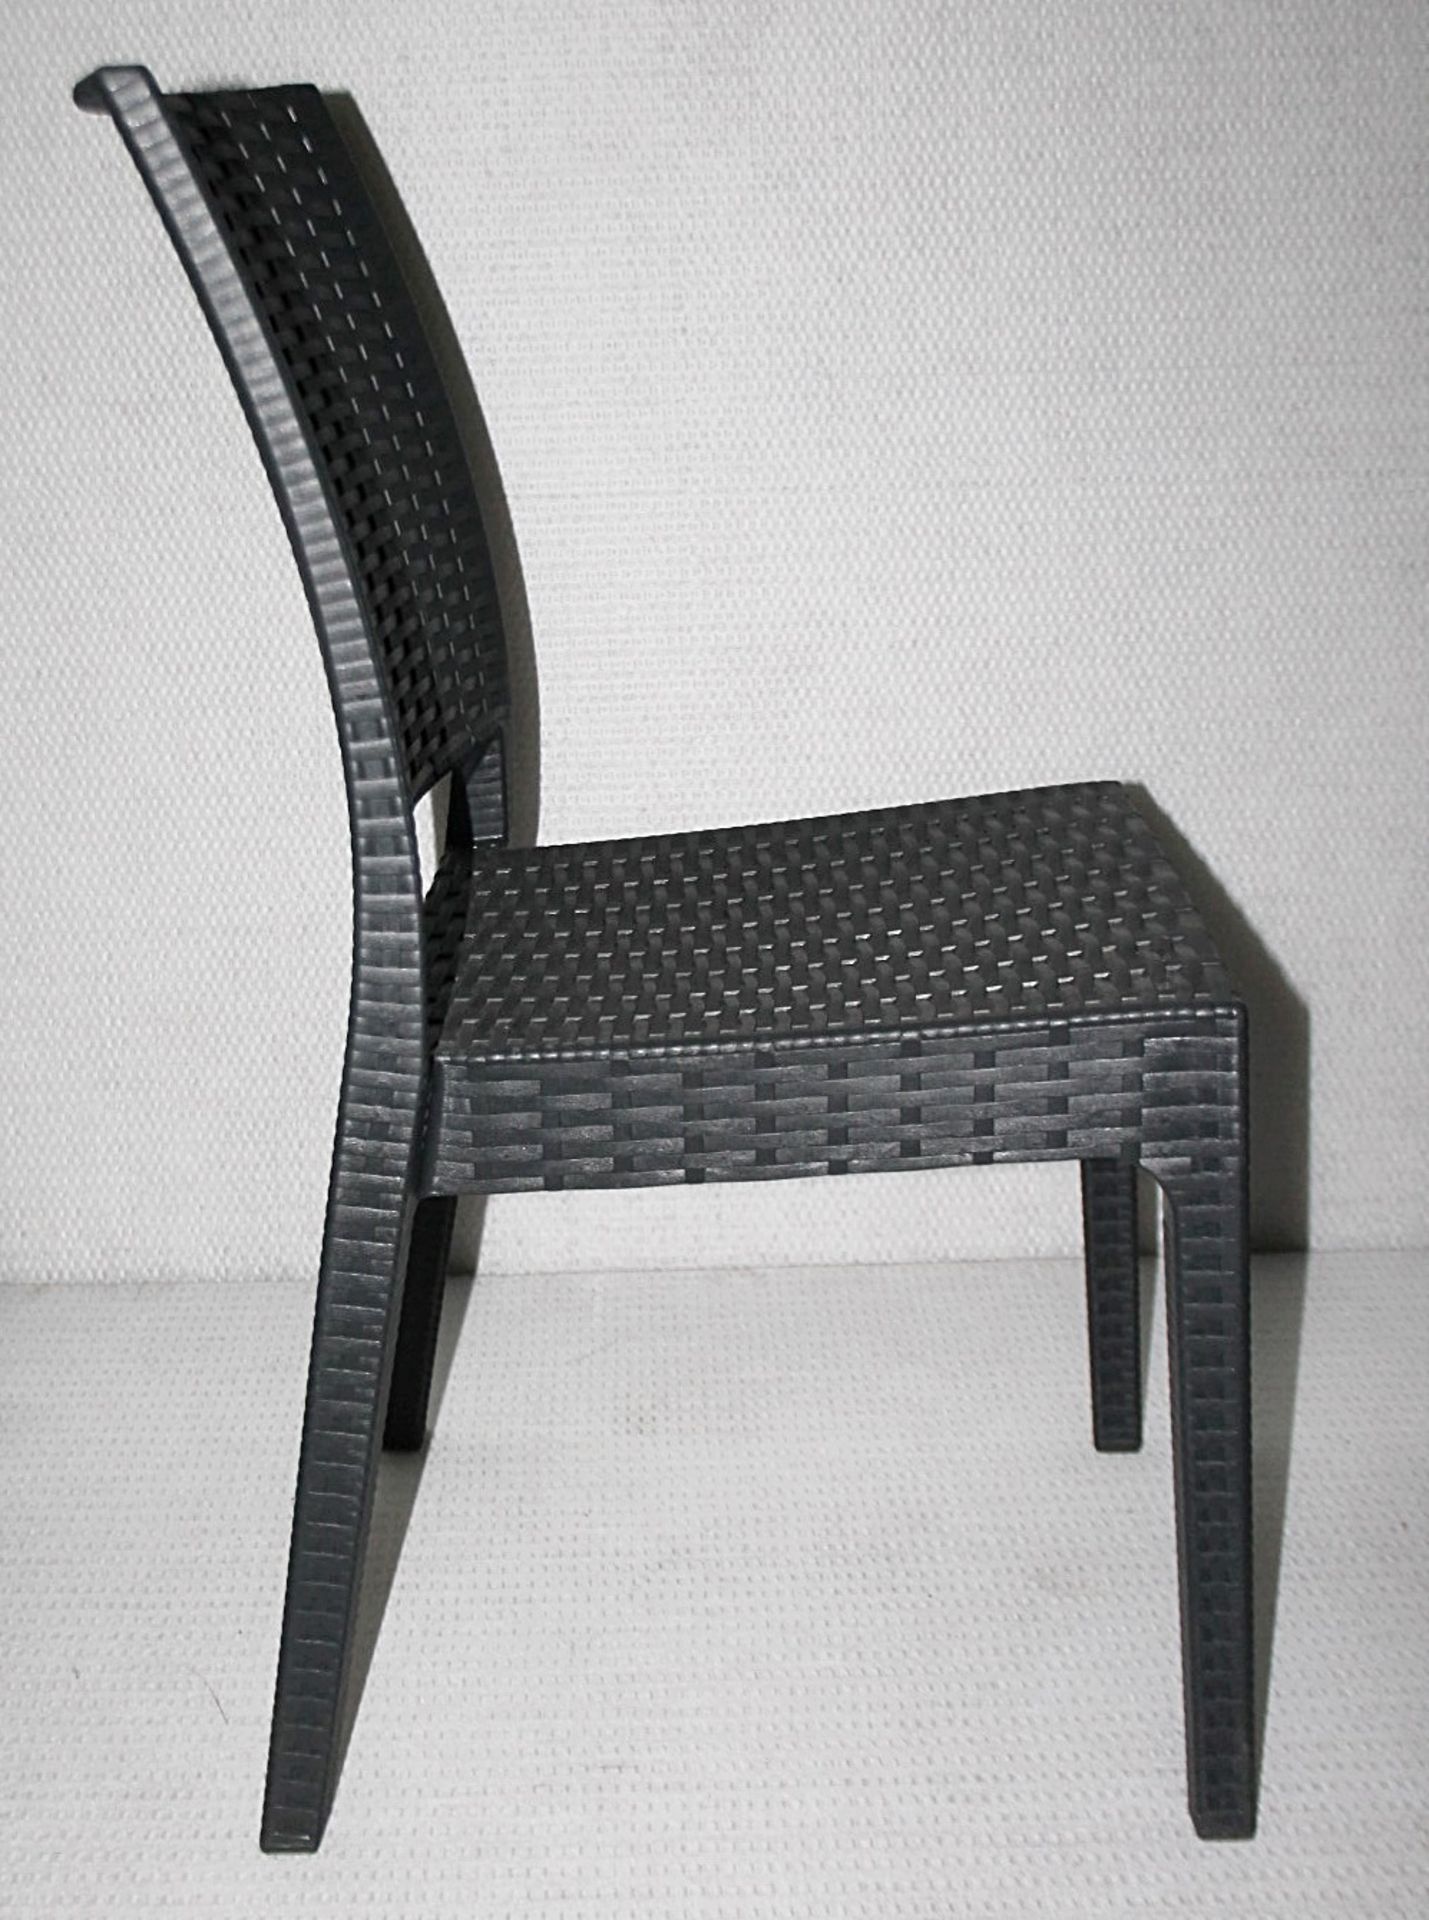 8 x Siesta 'Florida' Rattan Style Garden Chairs In Dark Grey - Suitable For Commercial or Home Use - - Image 7 of 14